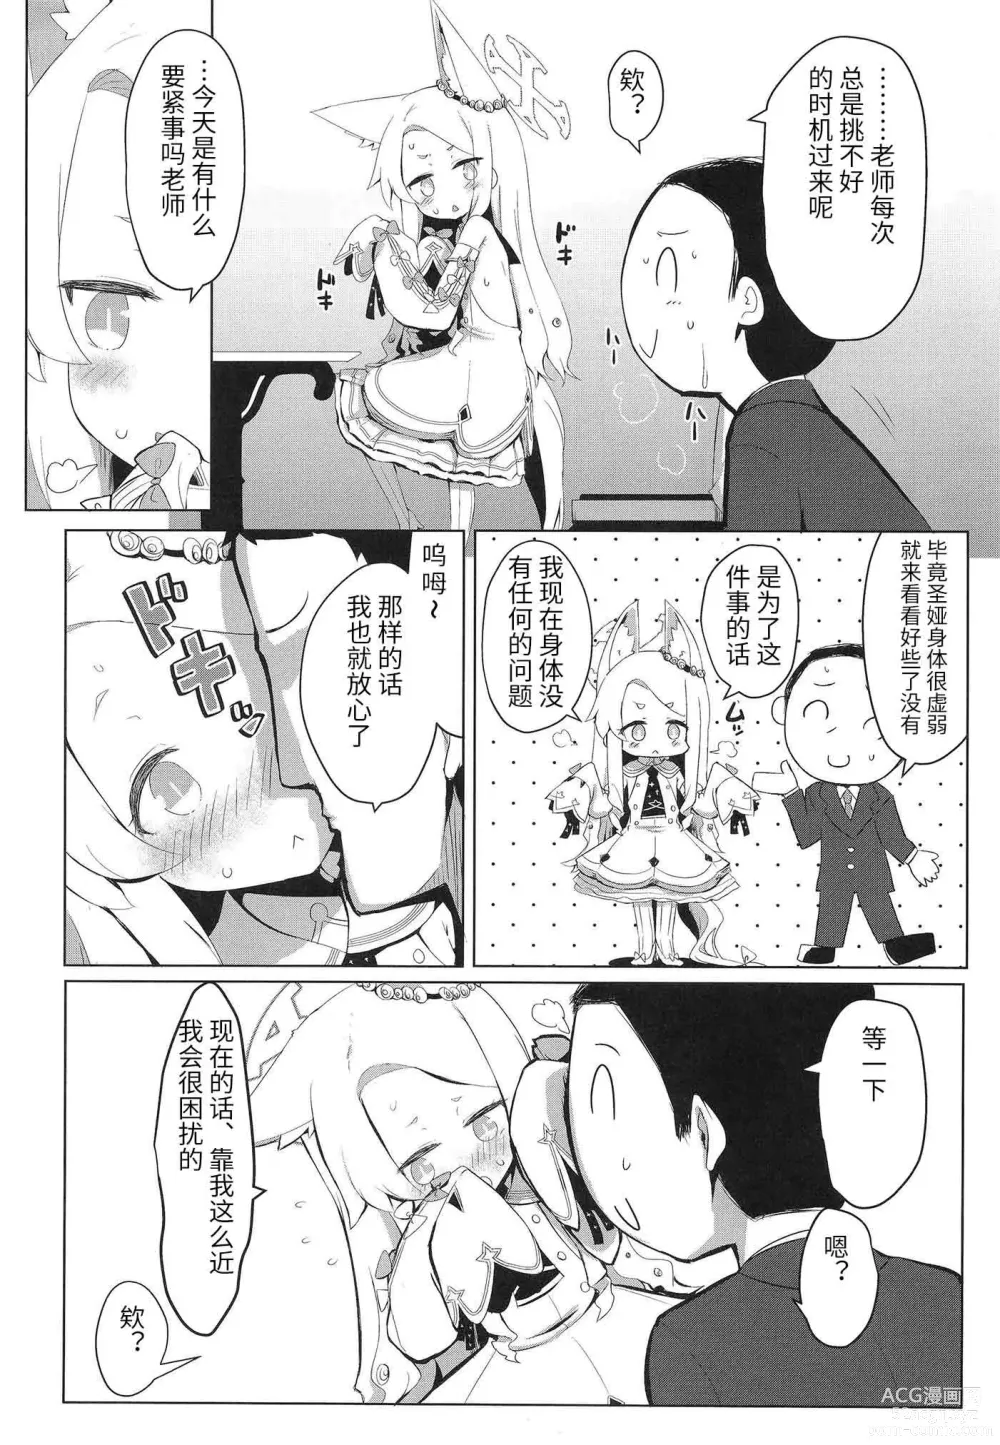 Page 4 of doujinshi 抱歉的发情圣娅